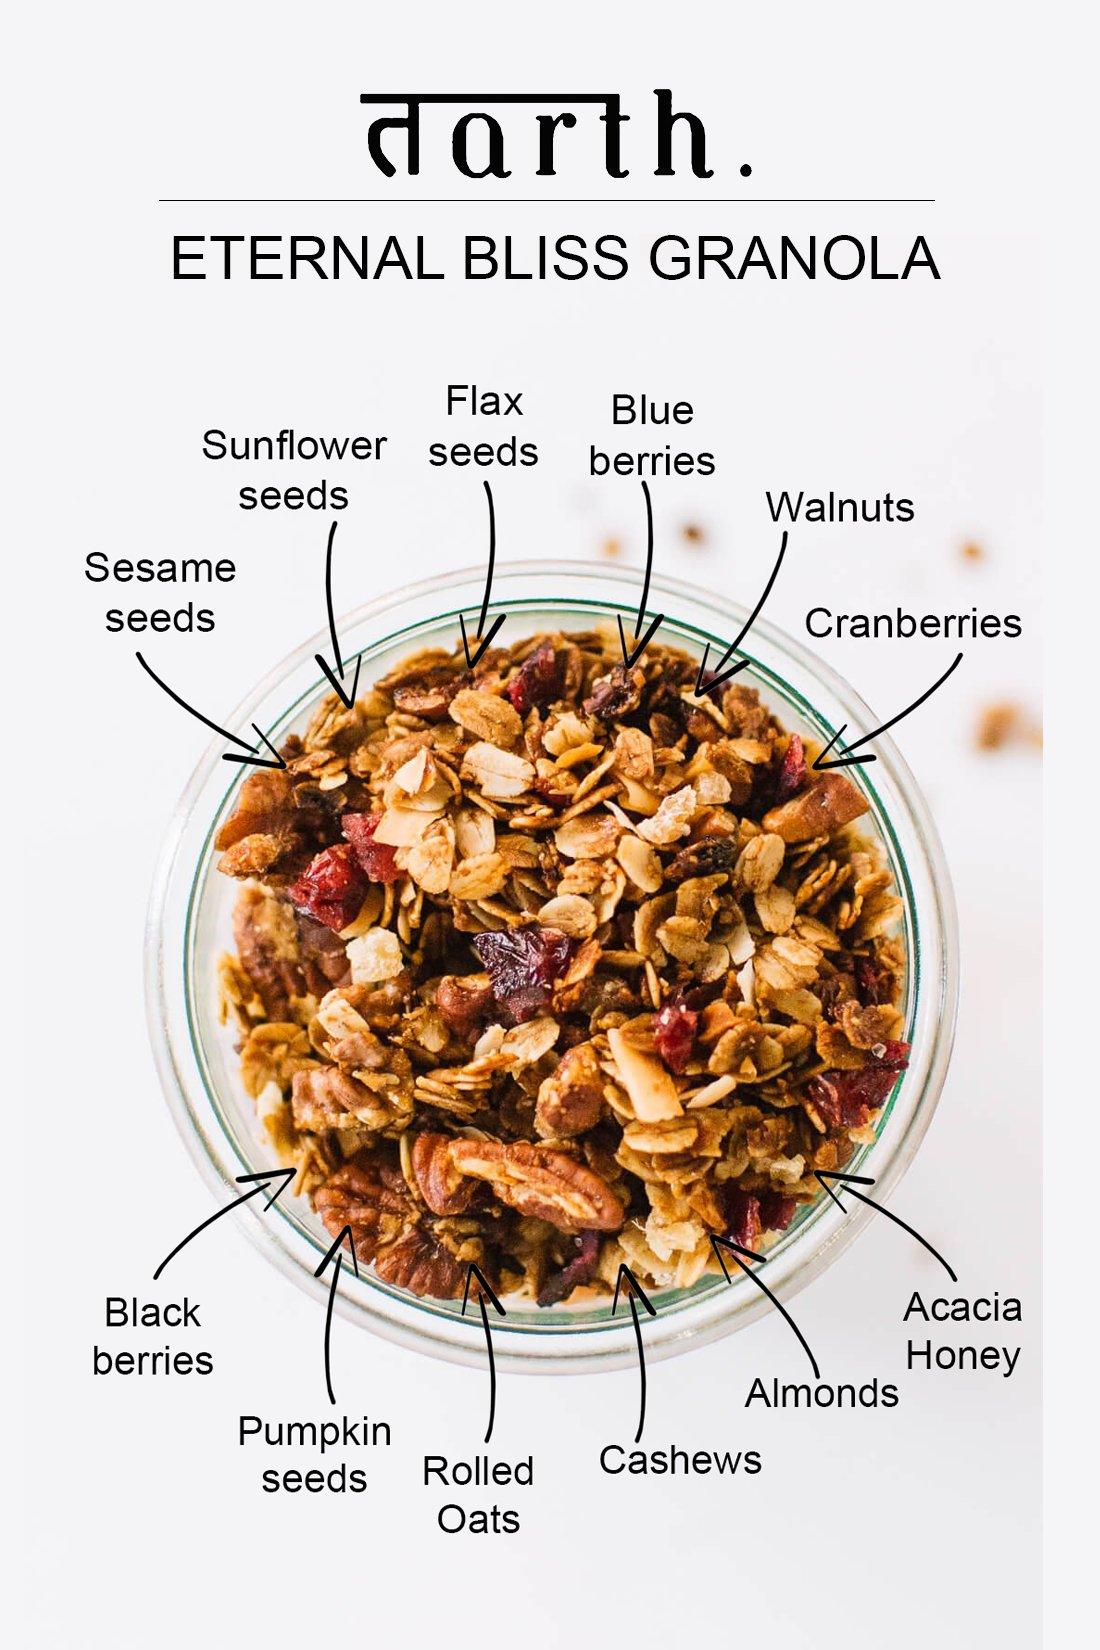 All the ingredients in Tarth's Eternal Bliss Granola.